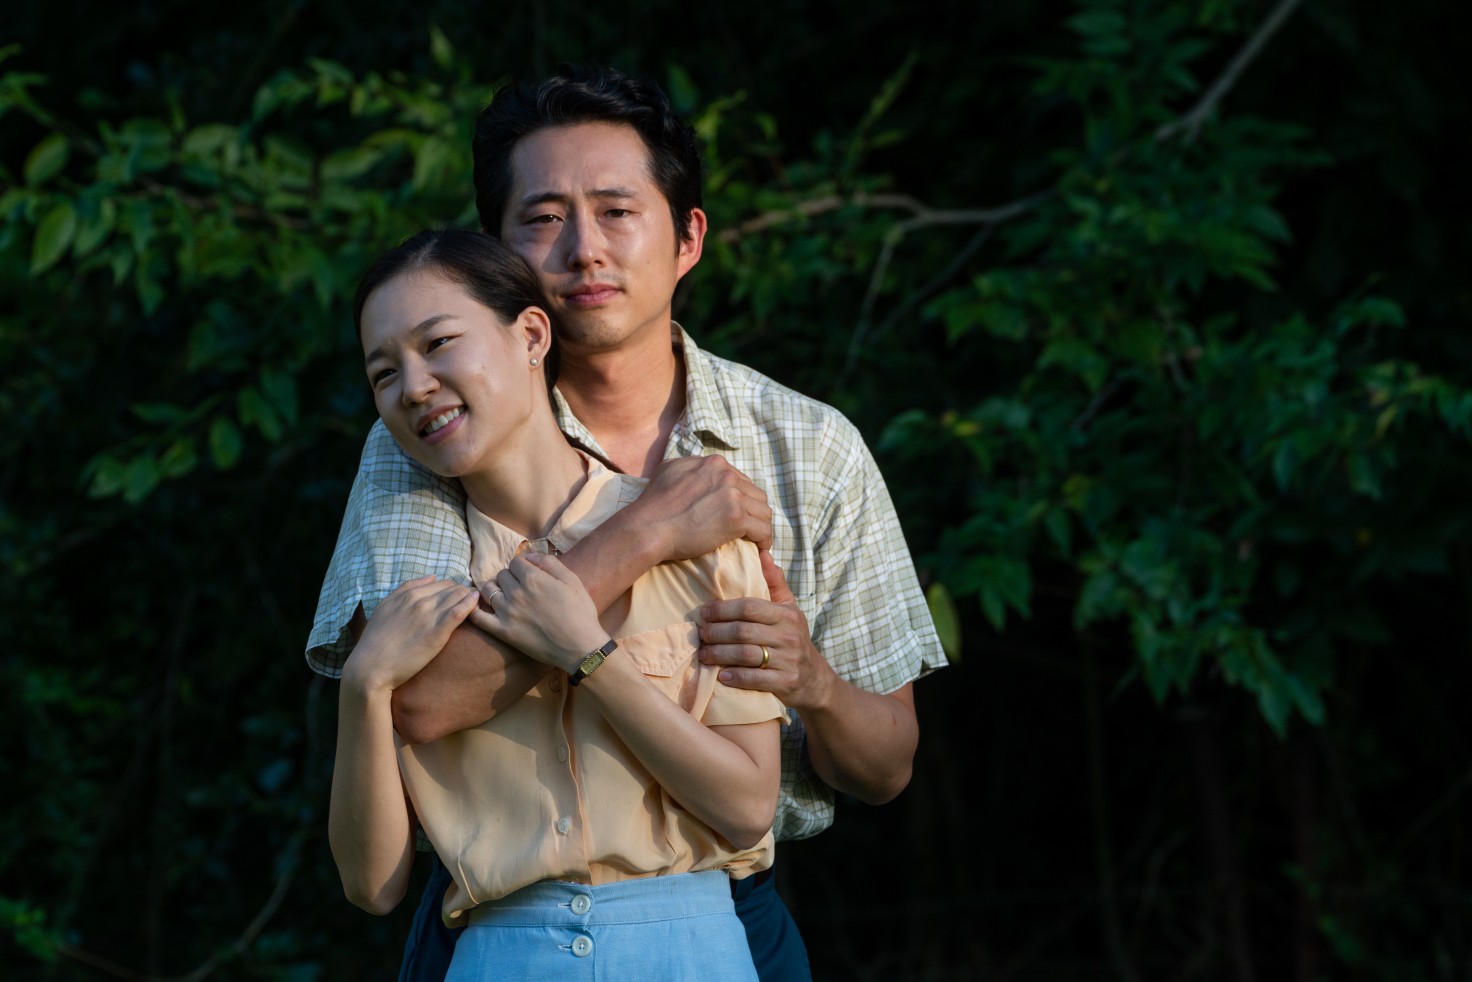 Still from the film "Minari" shows a young Korean couple embracing. A man stands, wrapping his arms around a woman who leans into his body and returns his embrace. The woman smiles and looks off-screen while the man stares forward with a blank, almost worried, expression